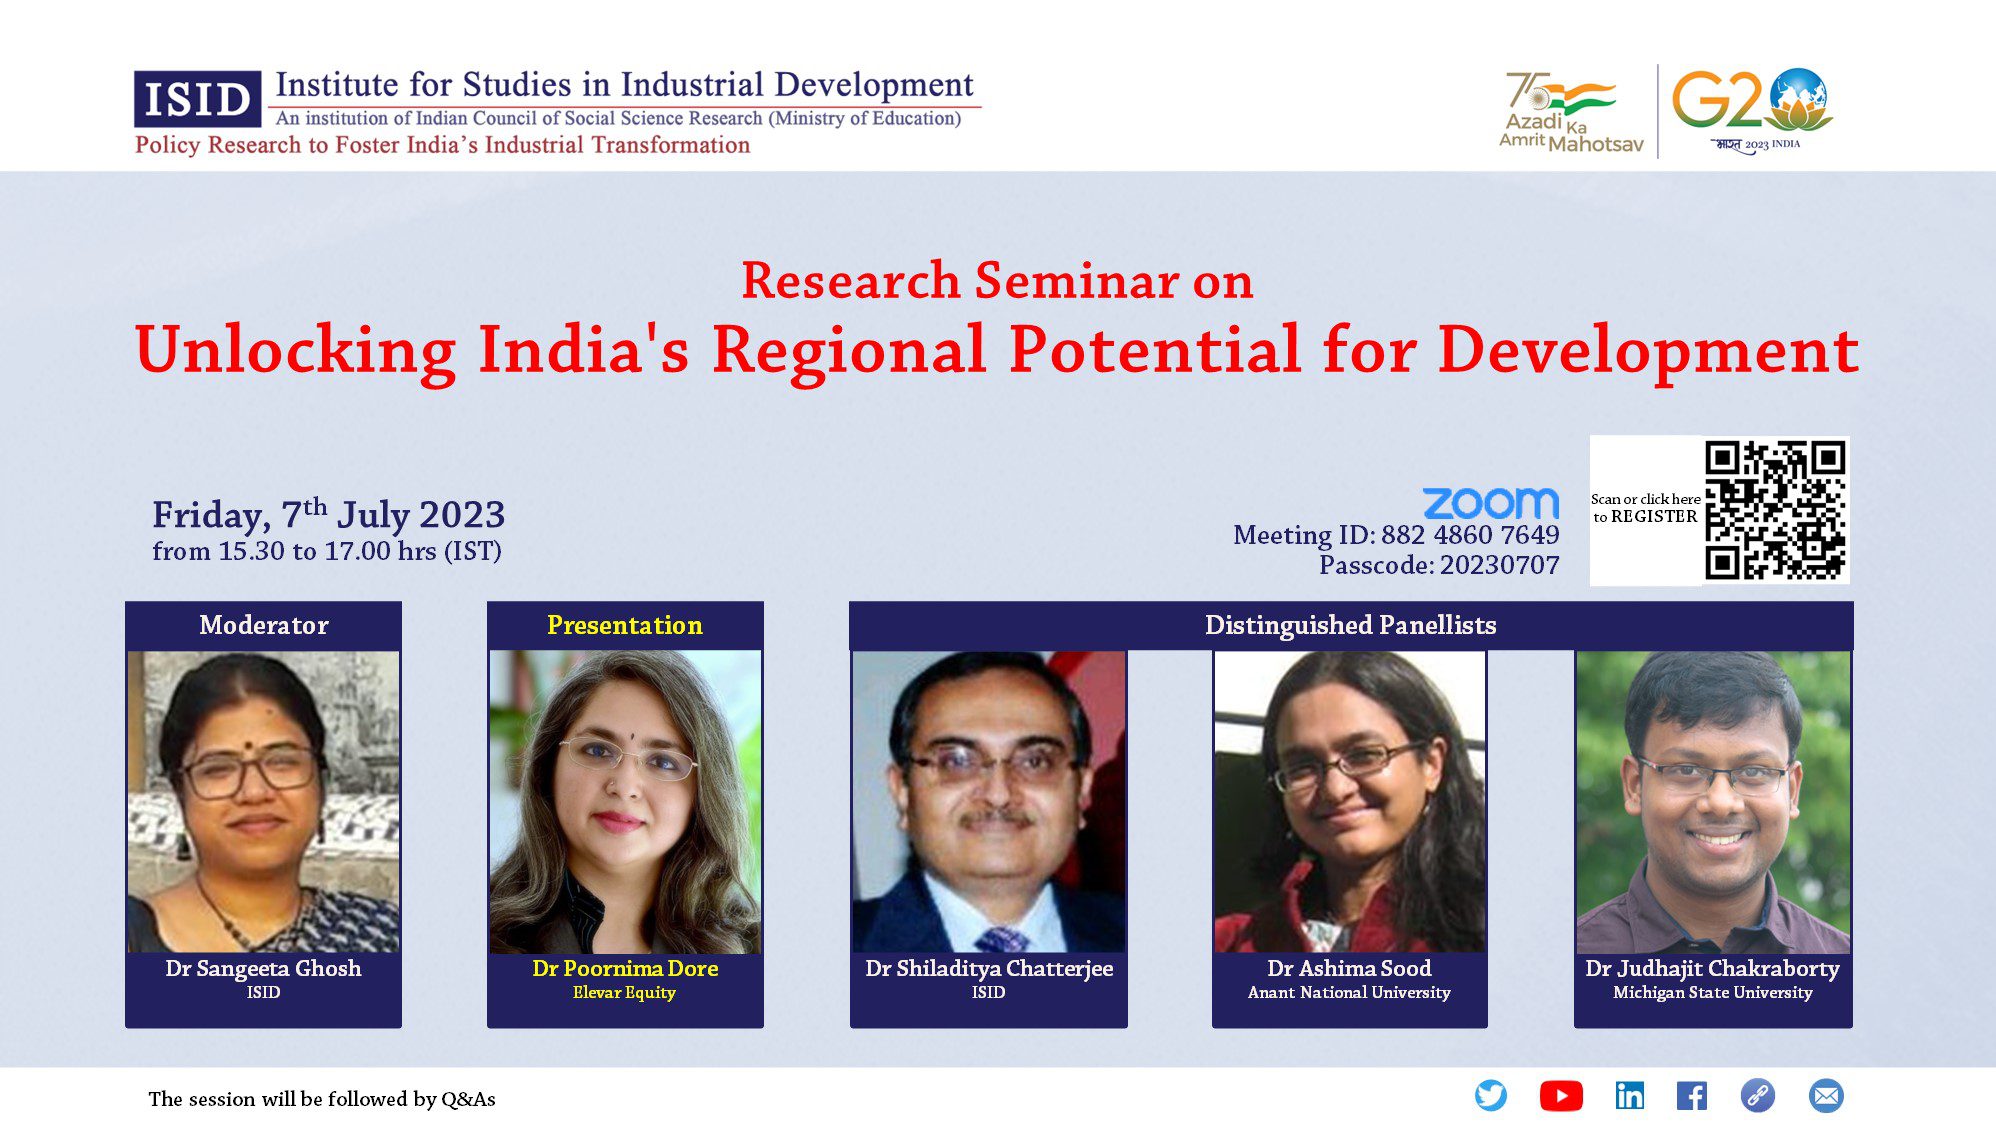 Research Seminar on Unlocking India’s Regional Potential for Development